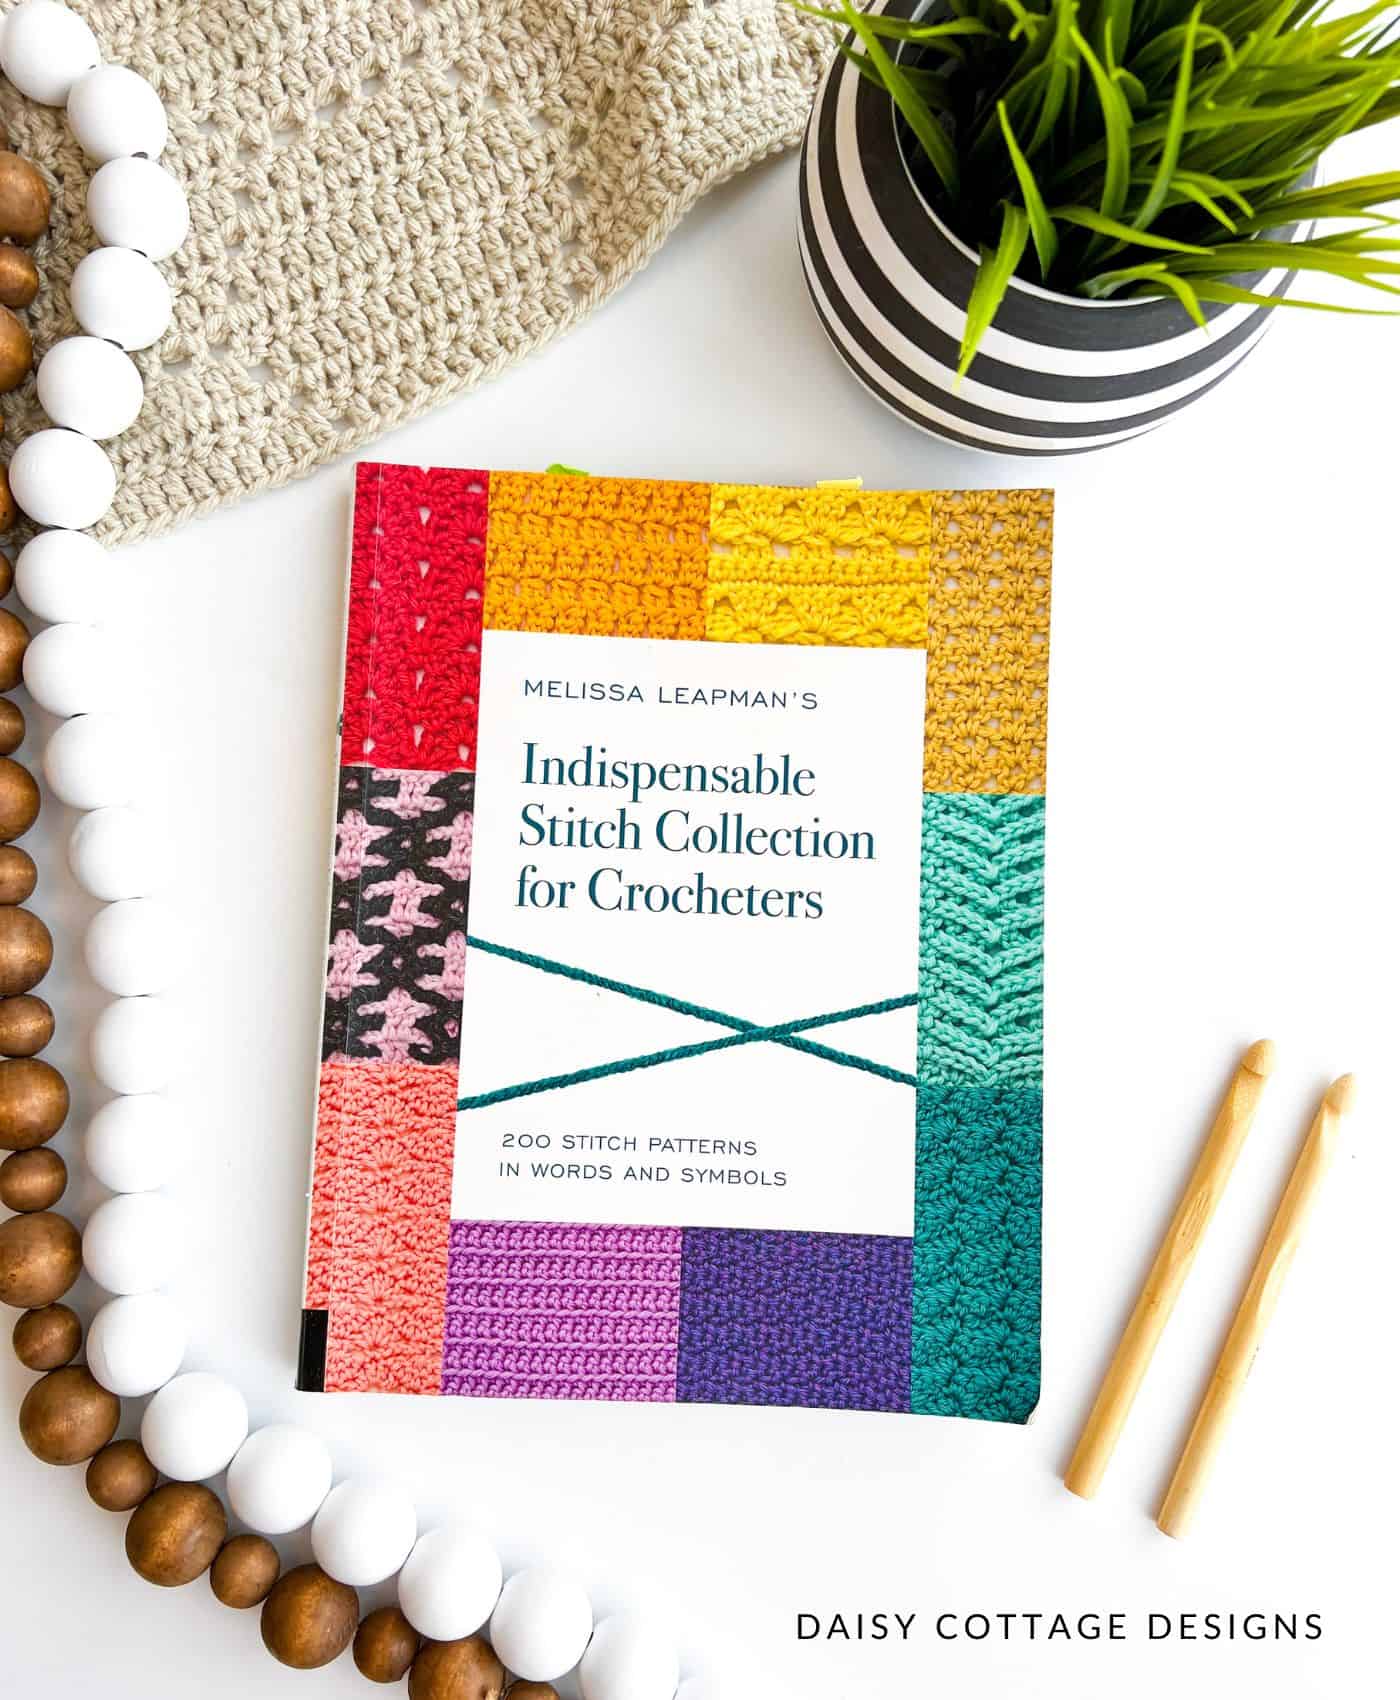 Colorful crochet pattern book